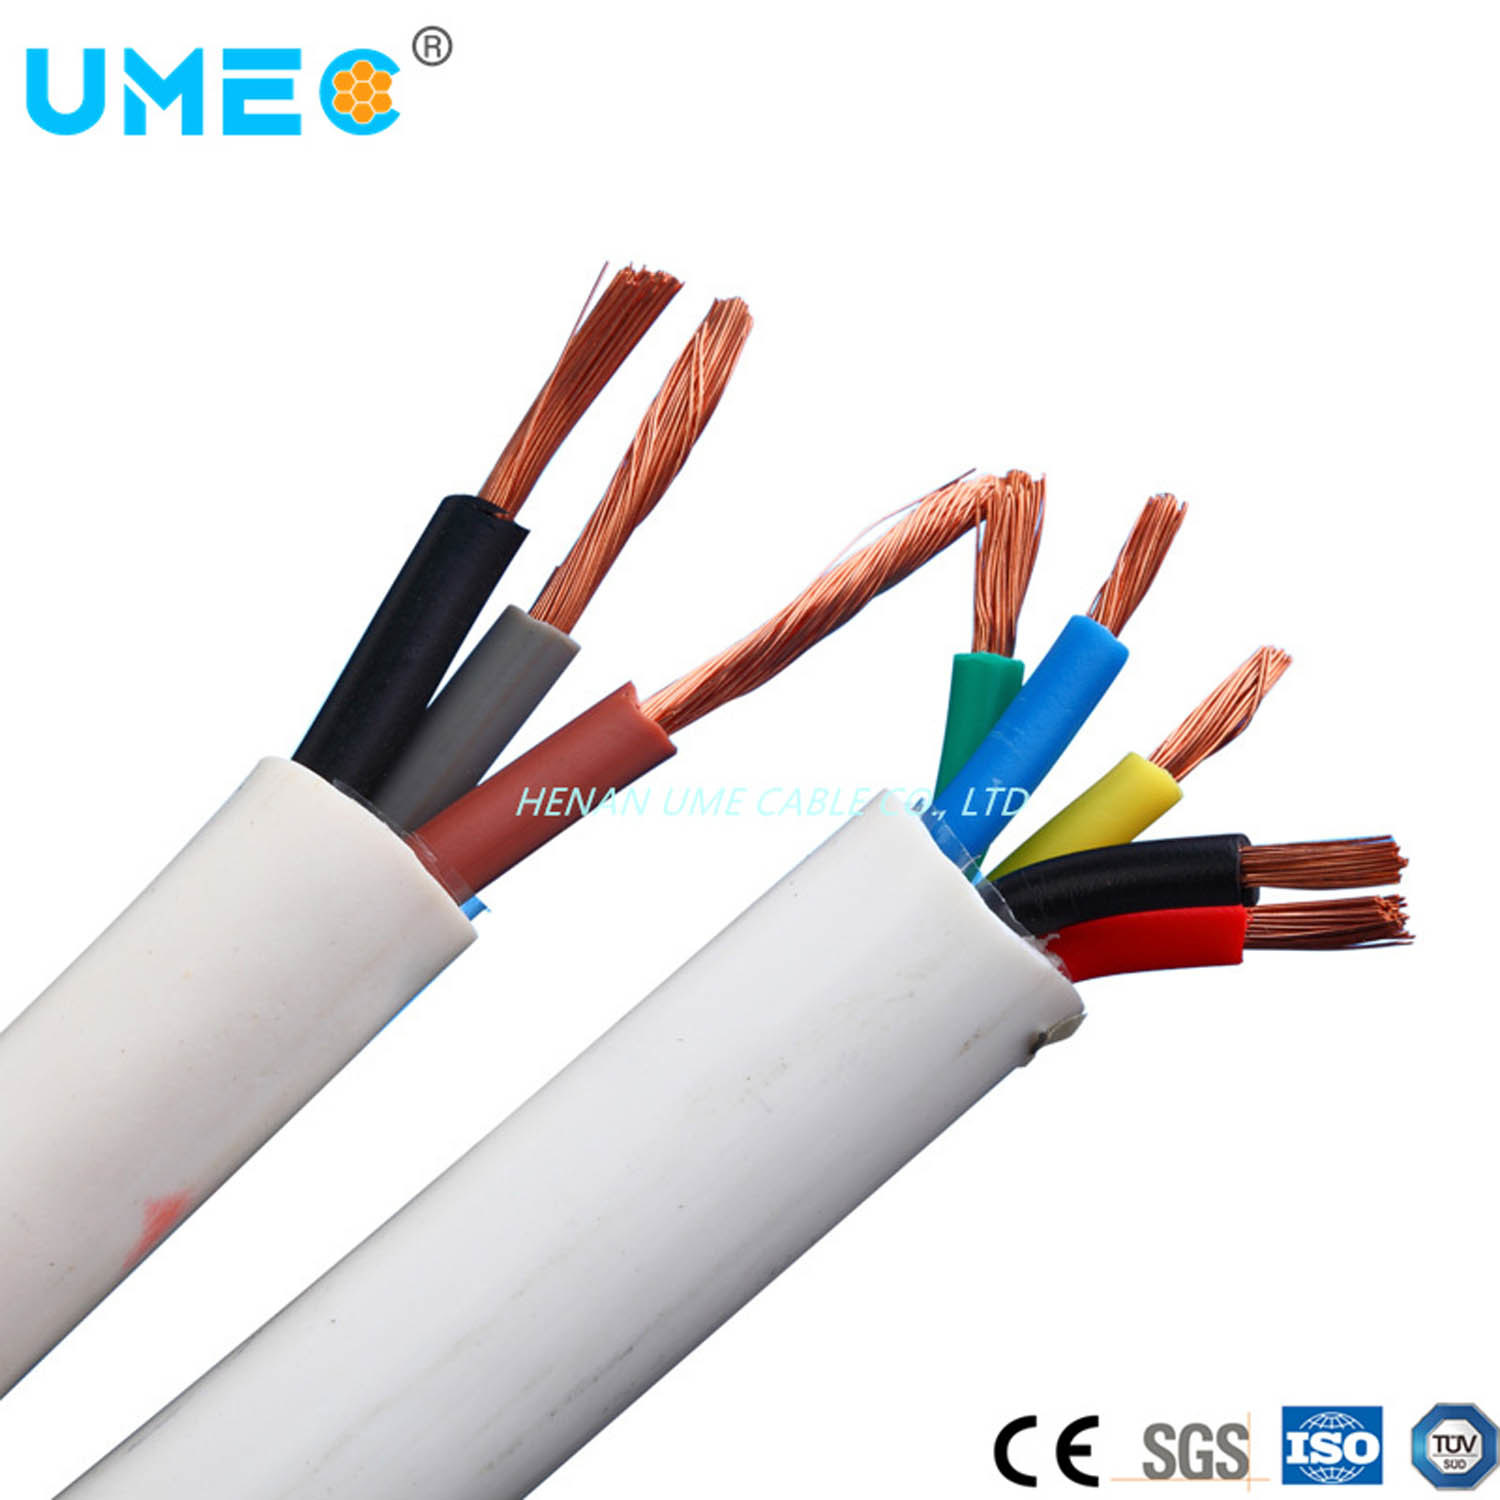 0.5mm2 0.75mm2 Multicore PVC Insulated PVC Sheathed Flexible Wire H03vvf Wire